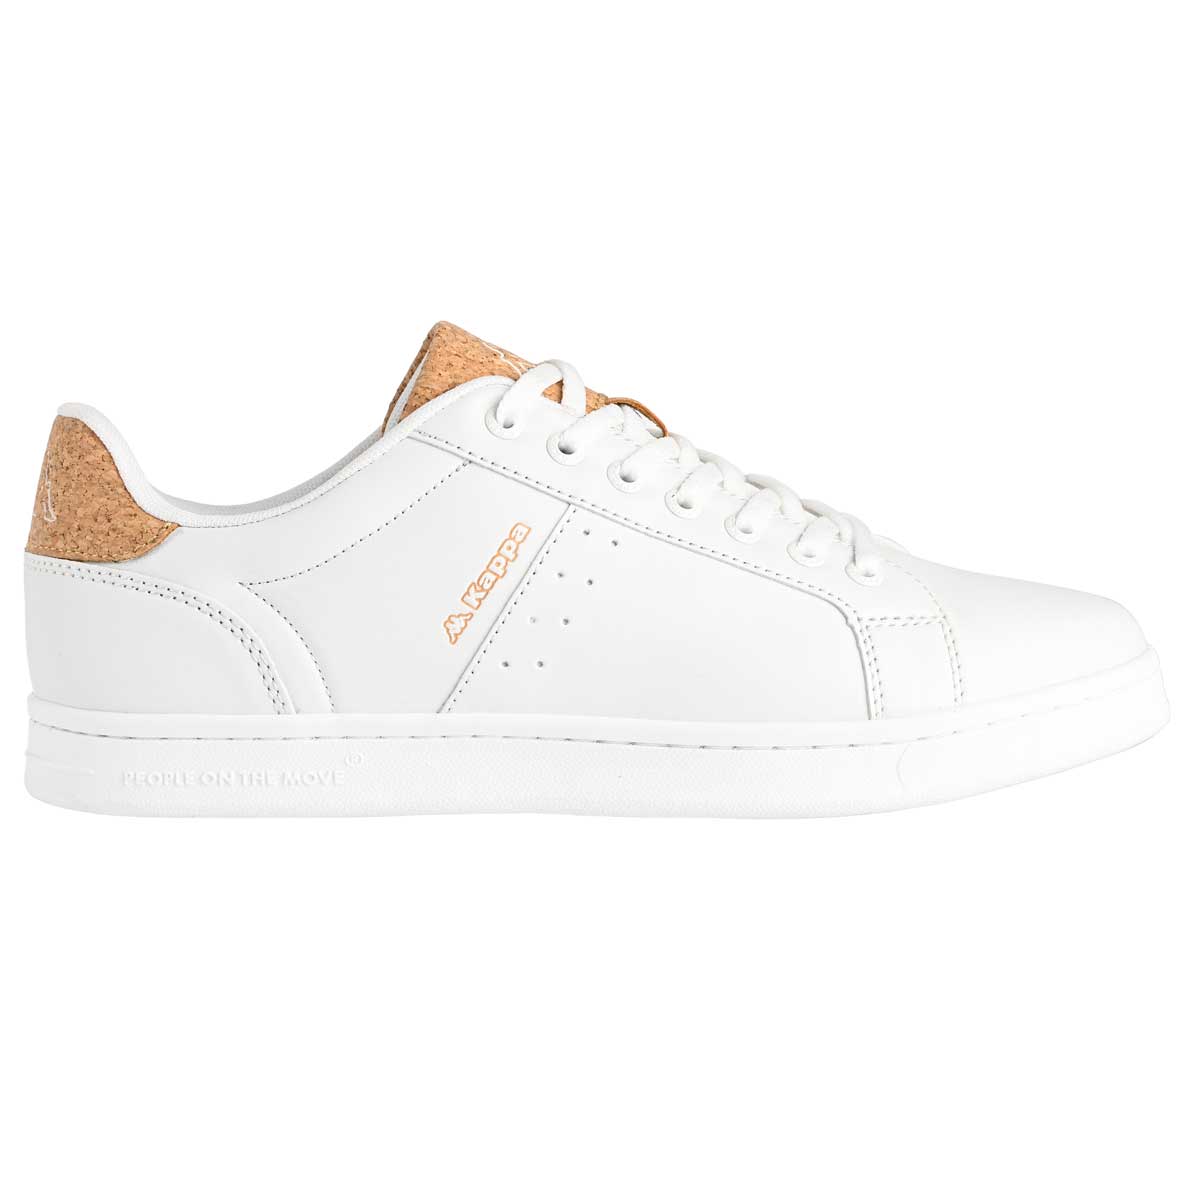 Chaussures lifestyle Amber 2 blanc homme